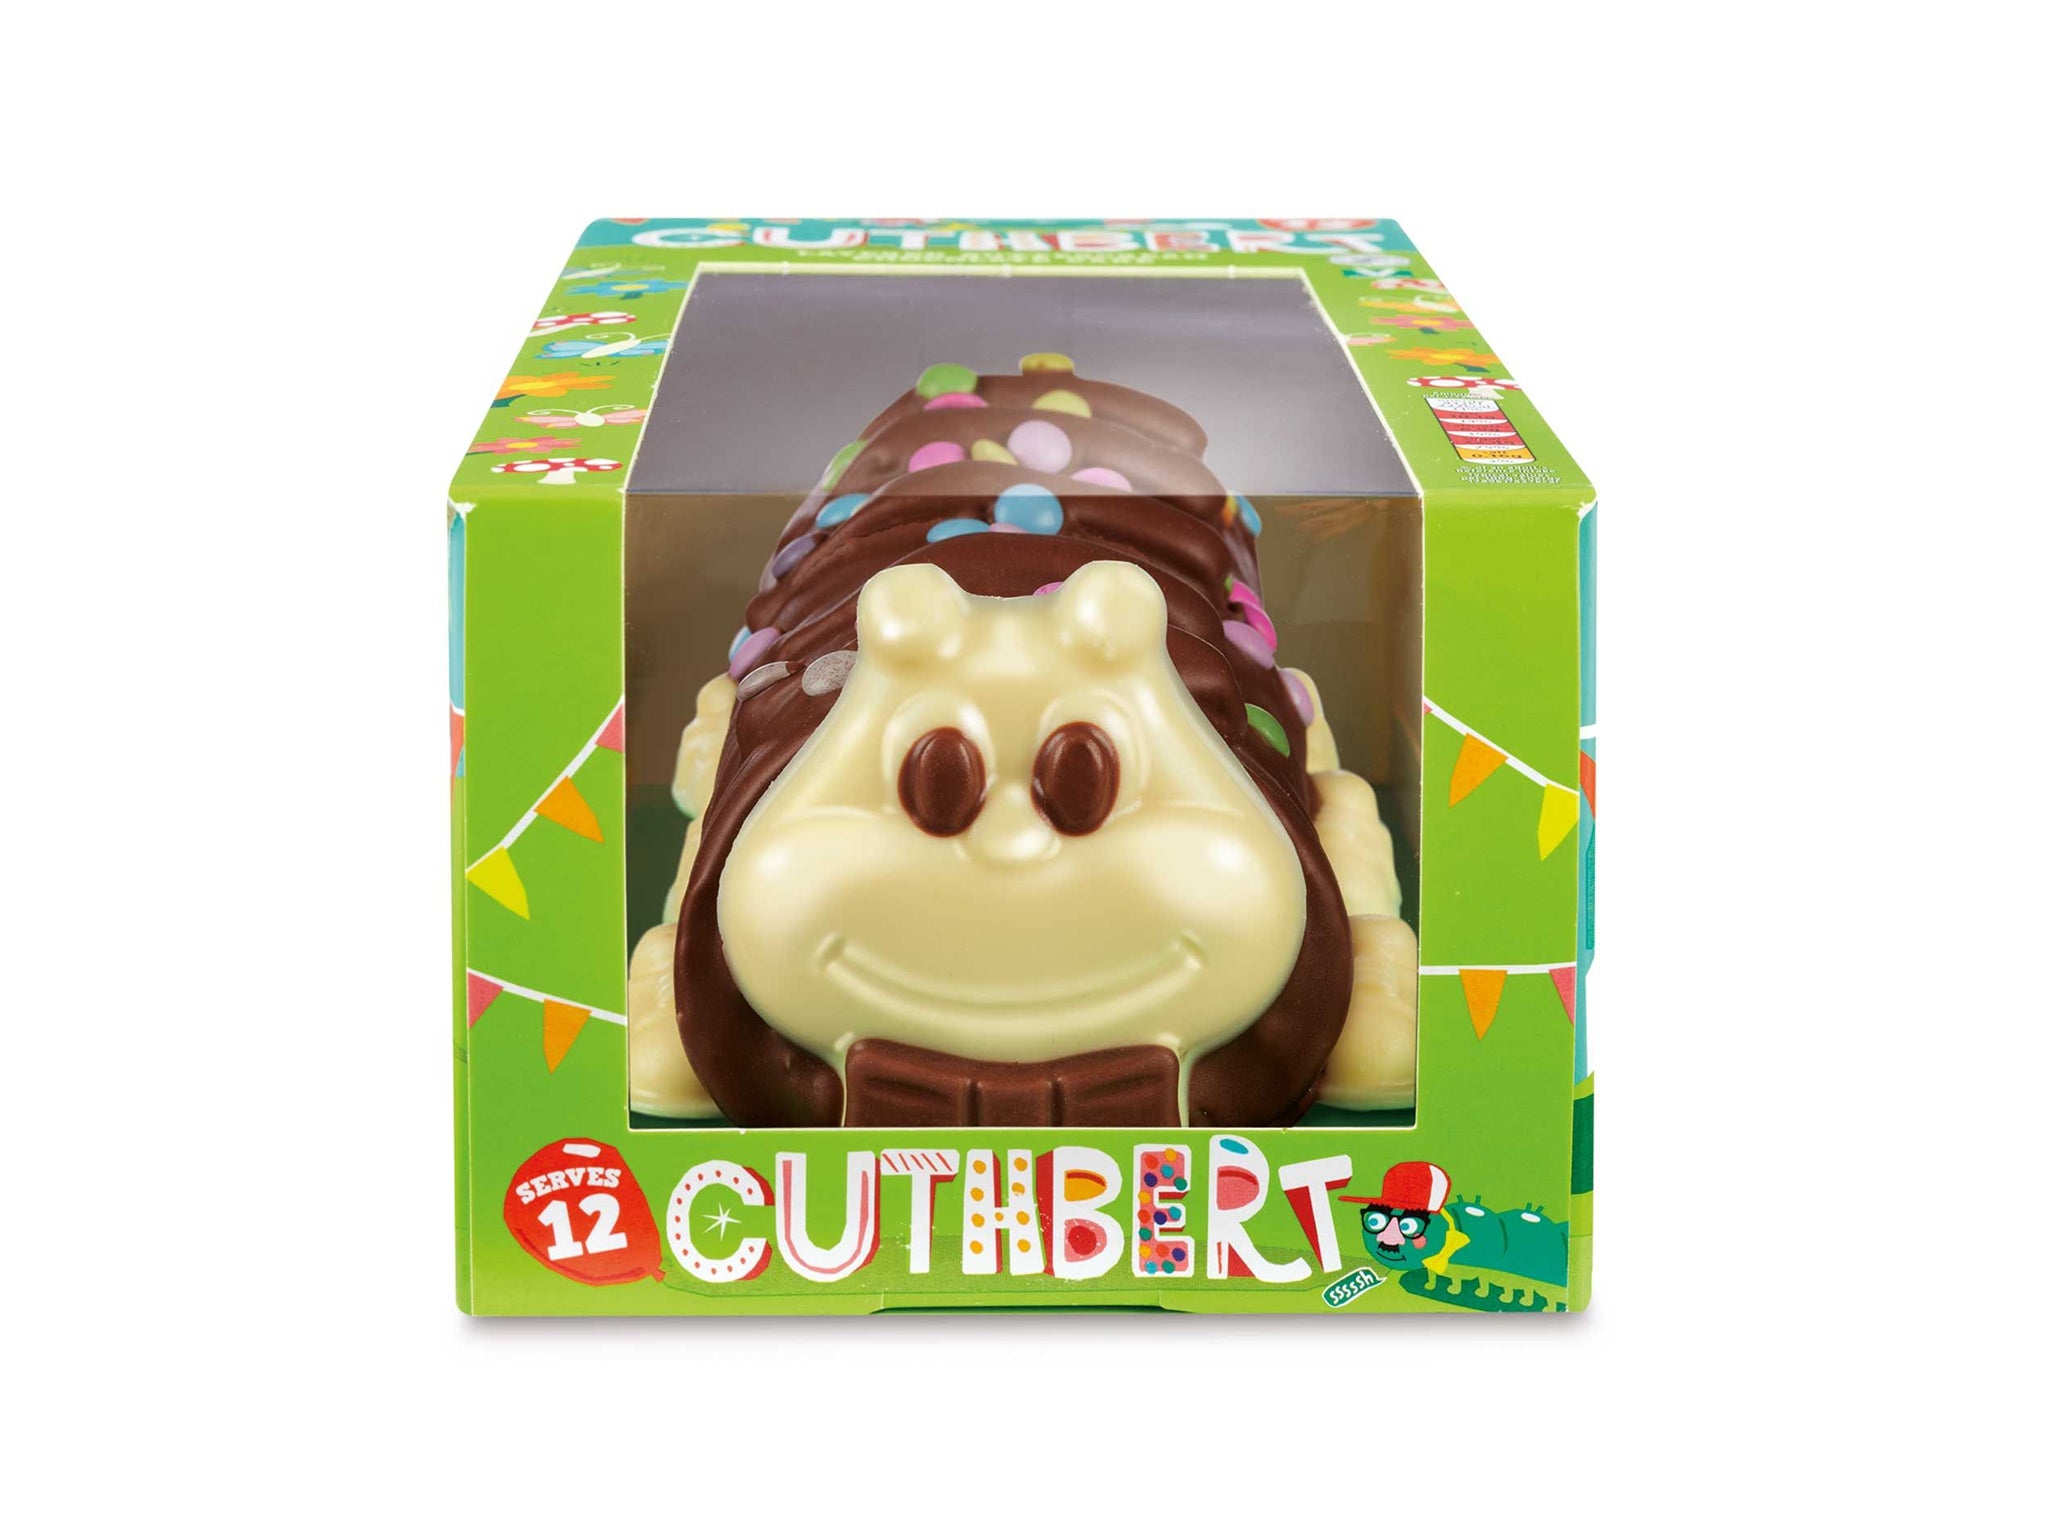 Colin the Caterpillar vs Cuthbert, Curly and Wiggles: we decide which  tastes best